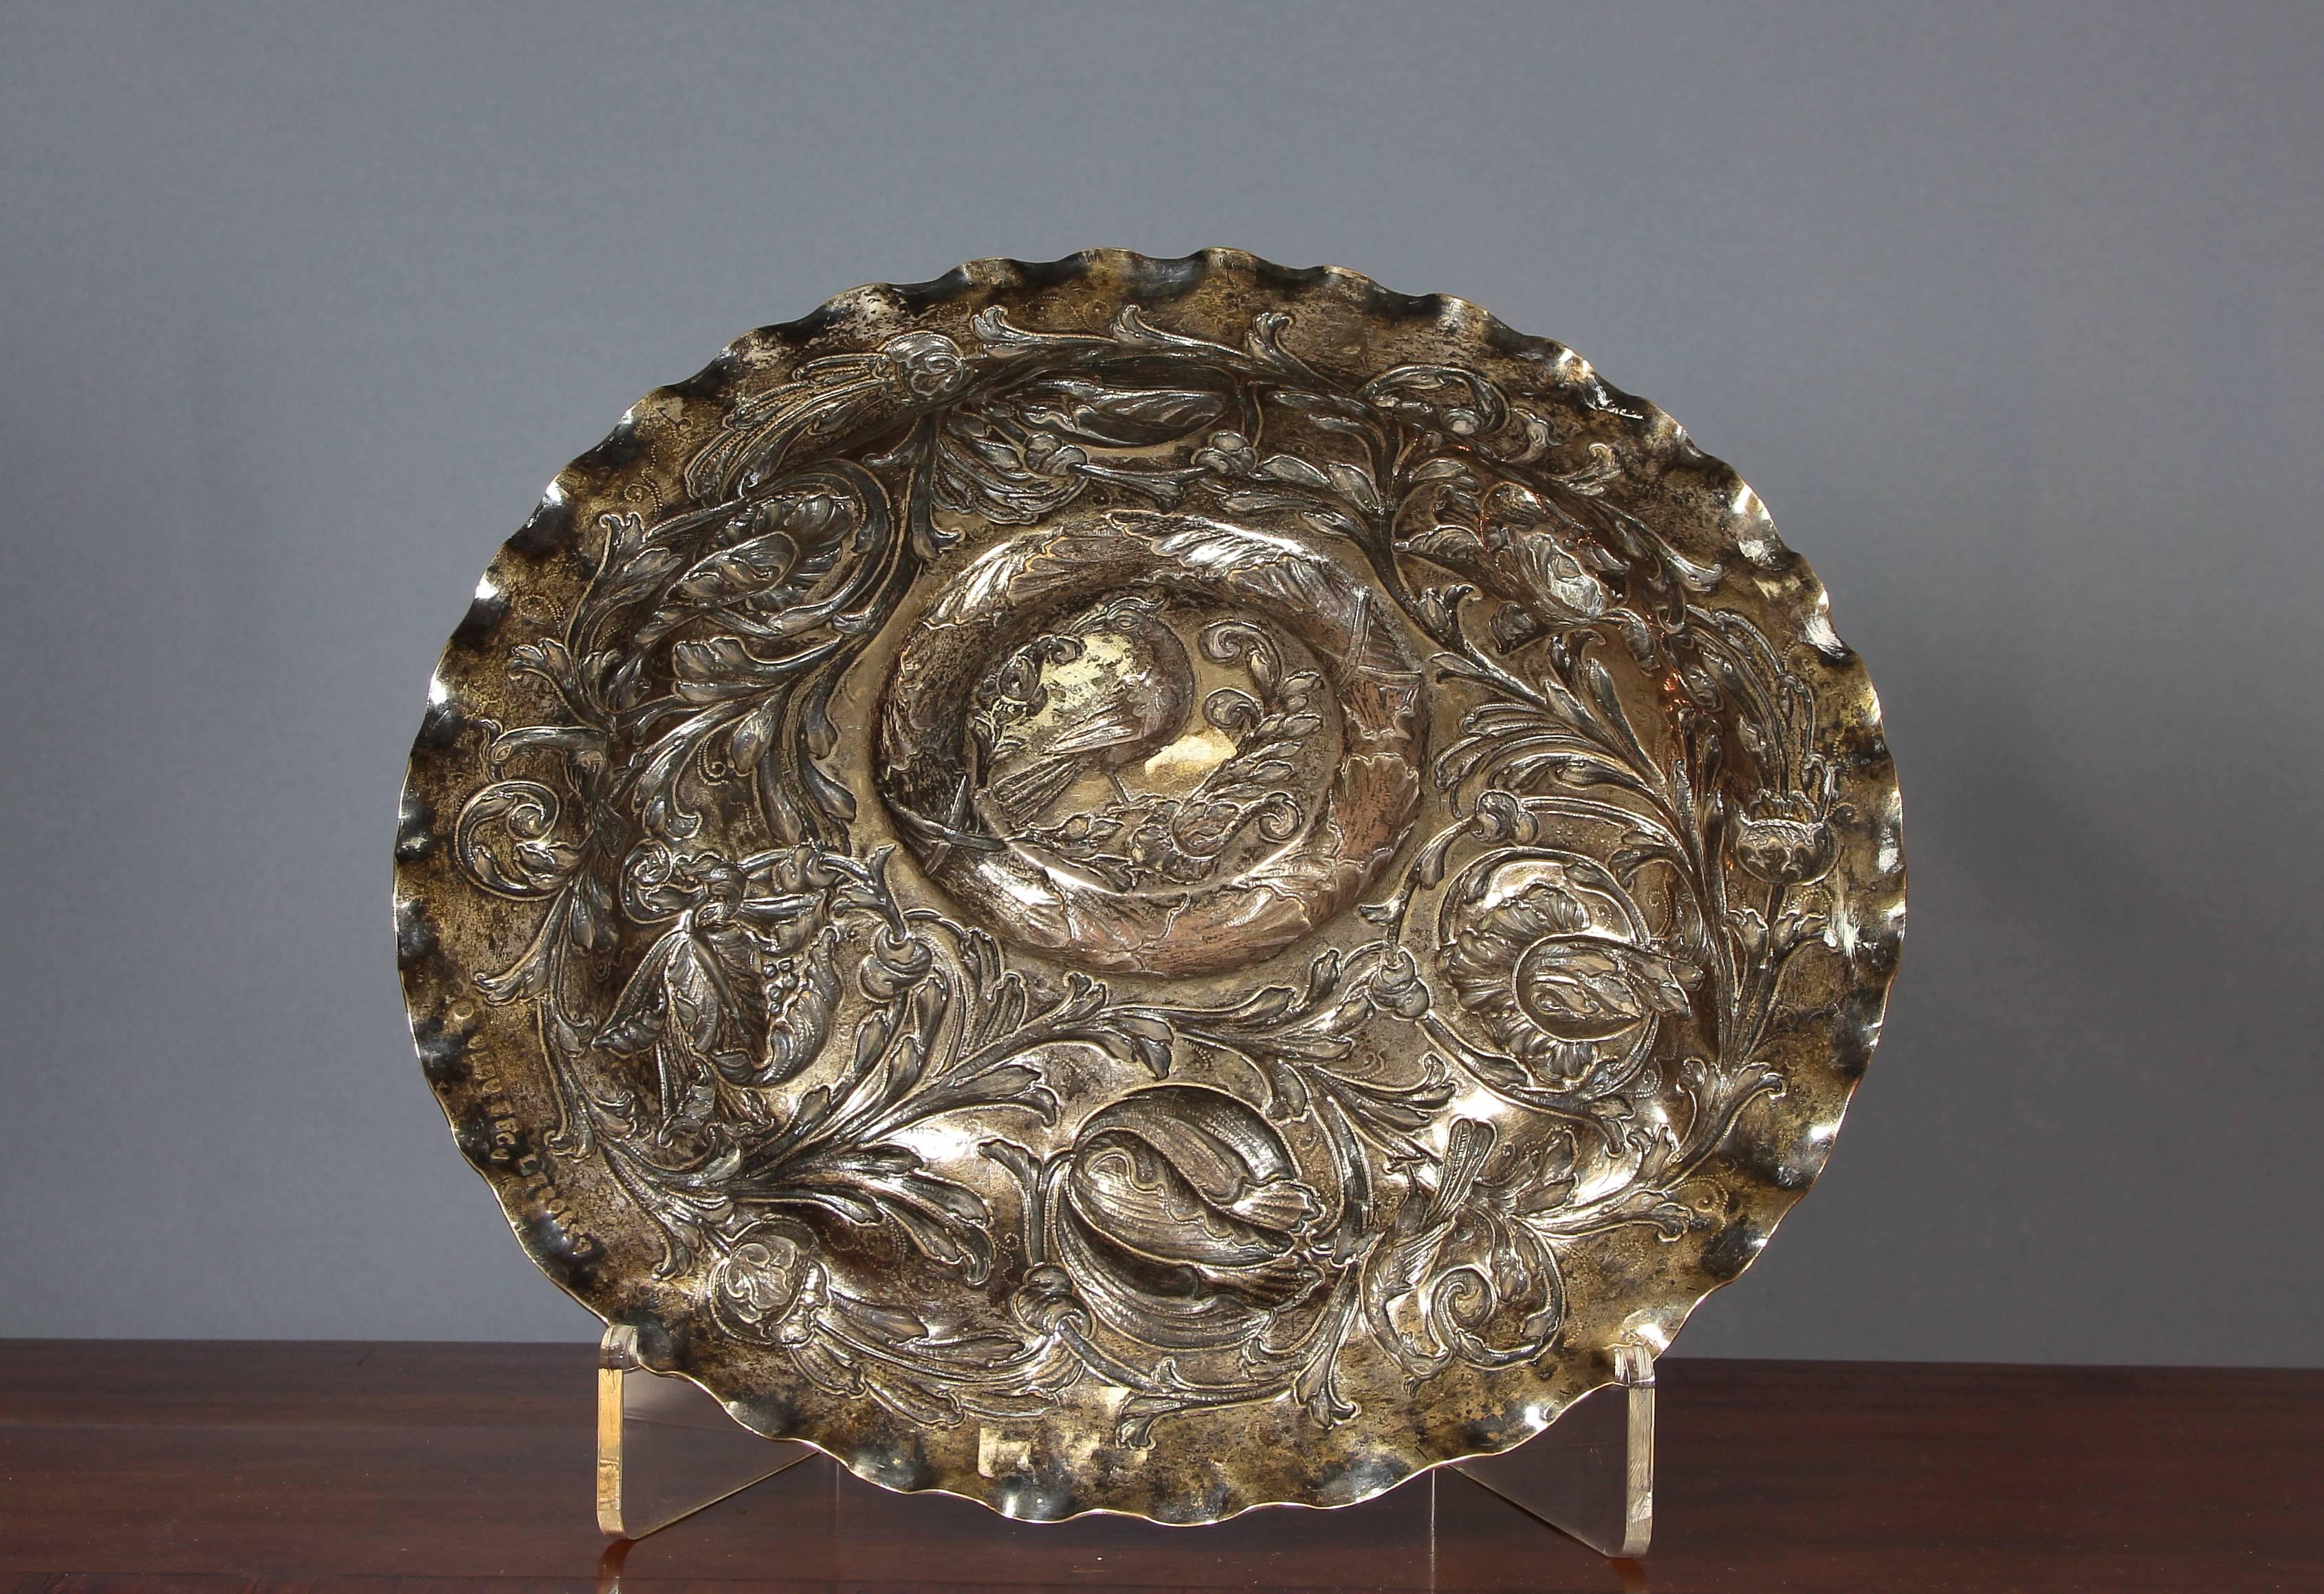 17th-18th century silver tray.
In the center a pheasant inside a laurel and floral elements interlacing pheasants on the edge
Family mark 